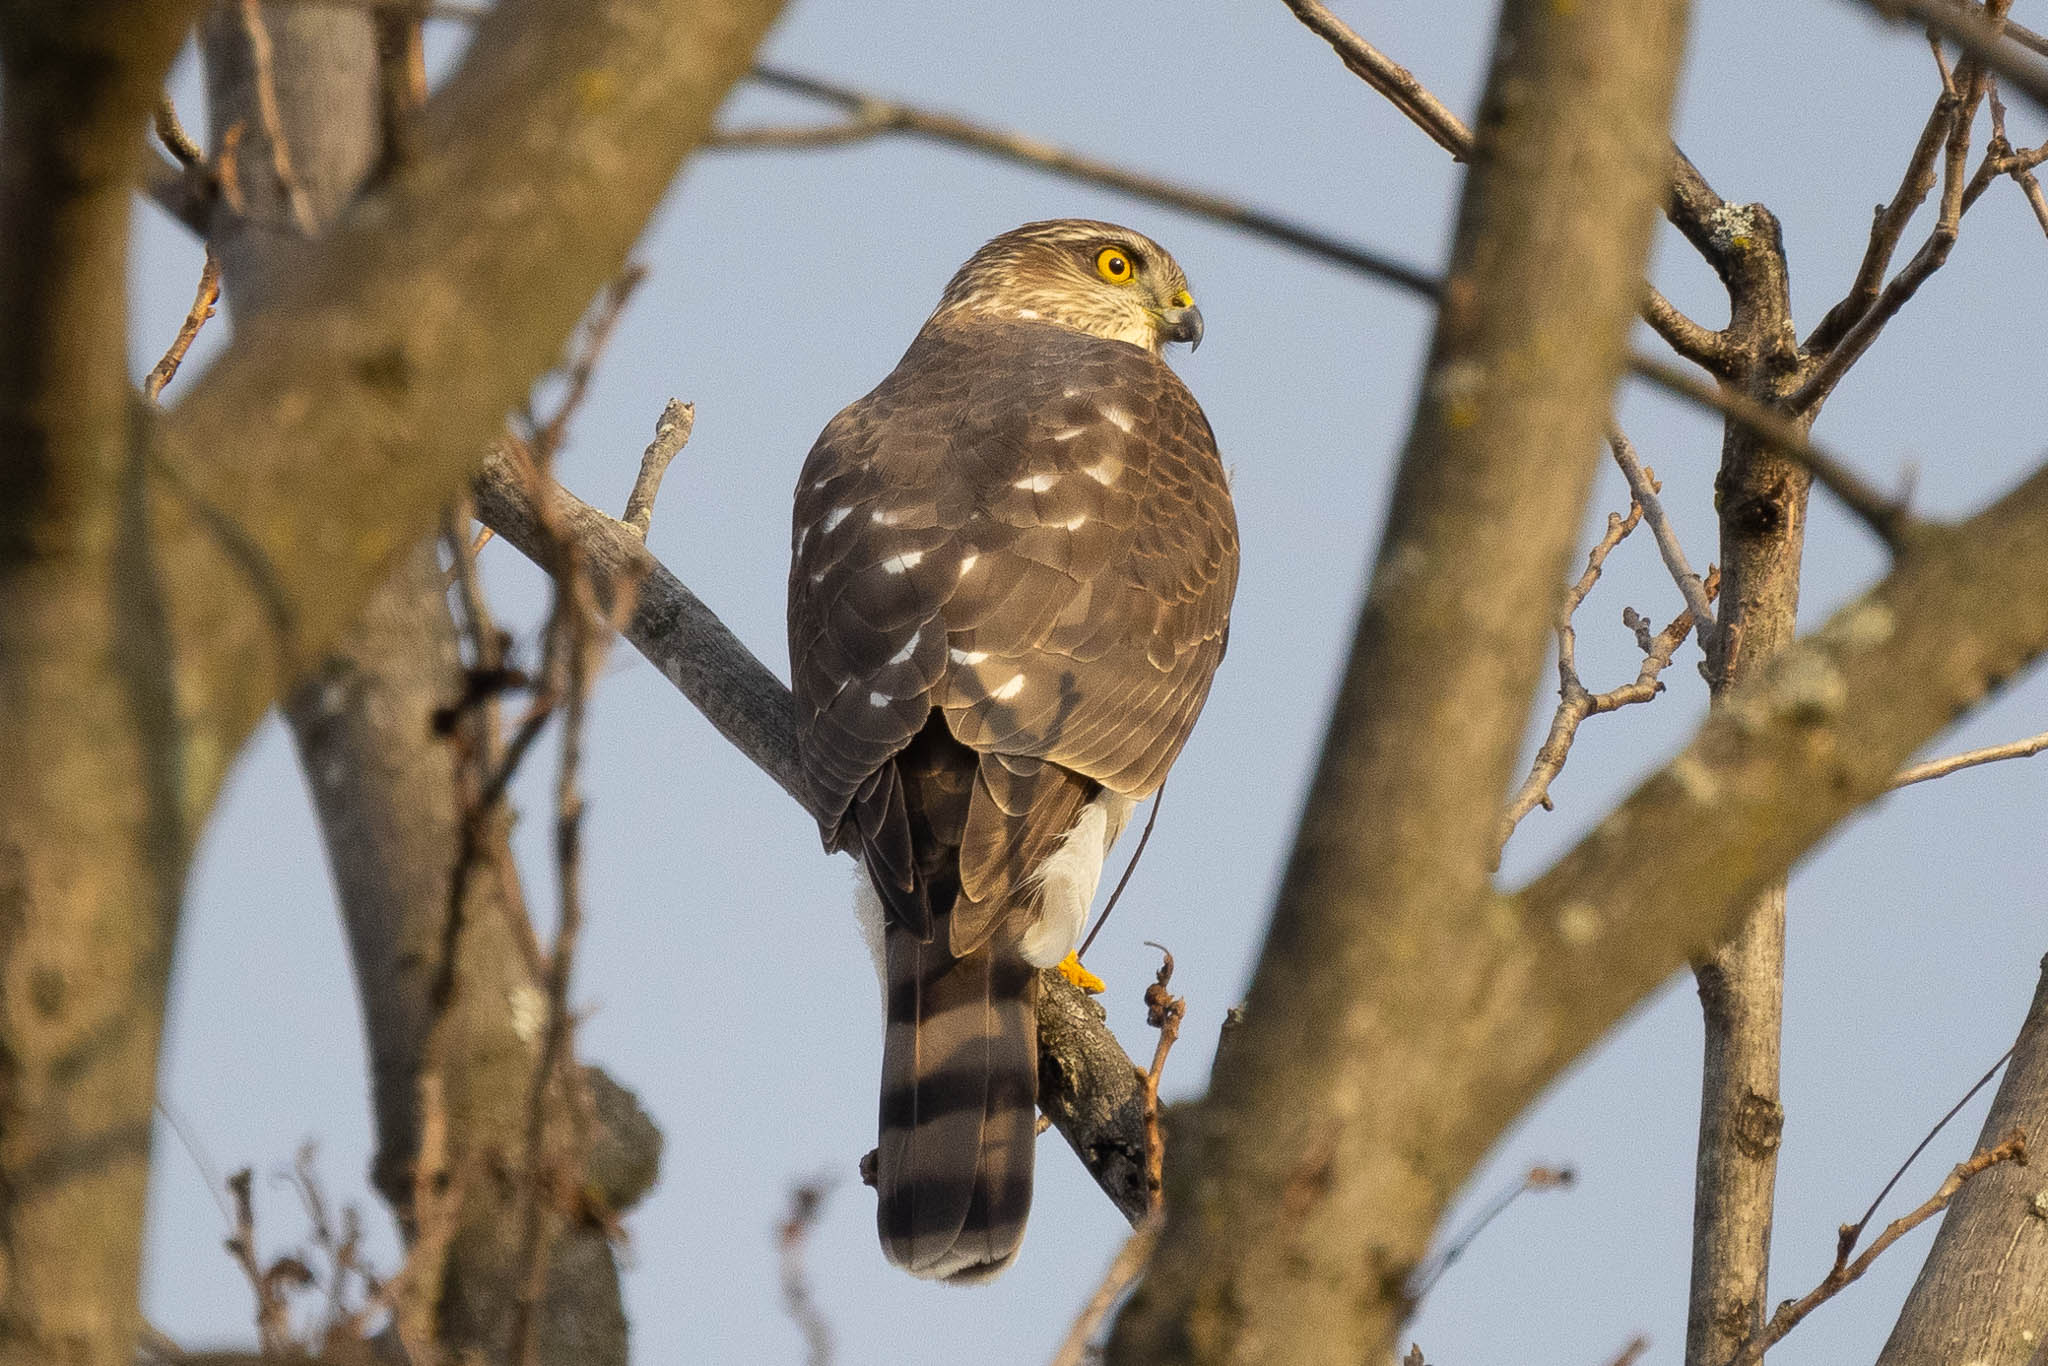 A Sharp-Shinned Hawk perched on a branch.